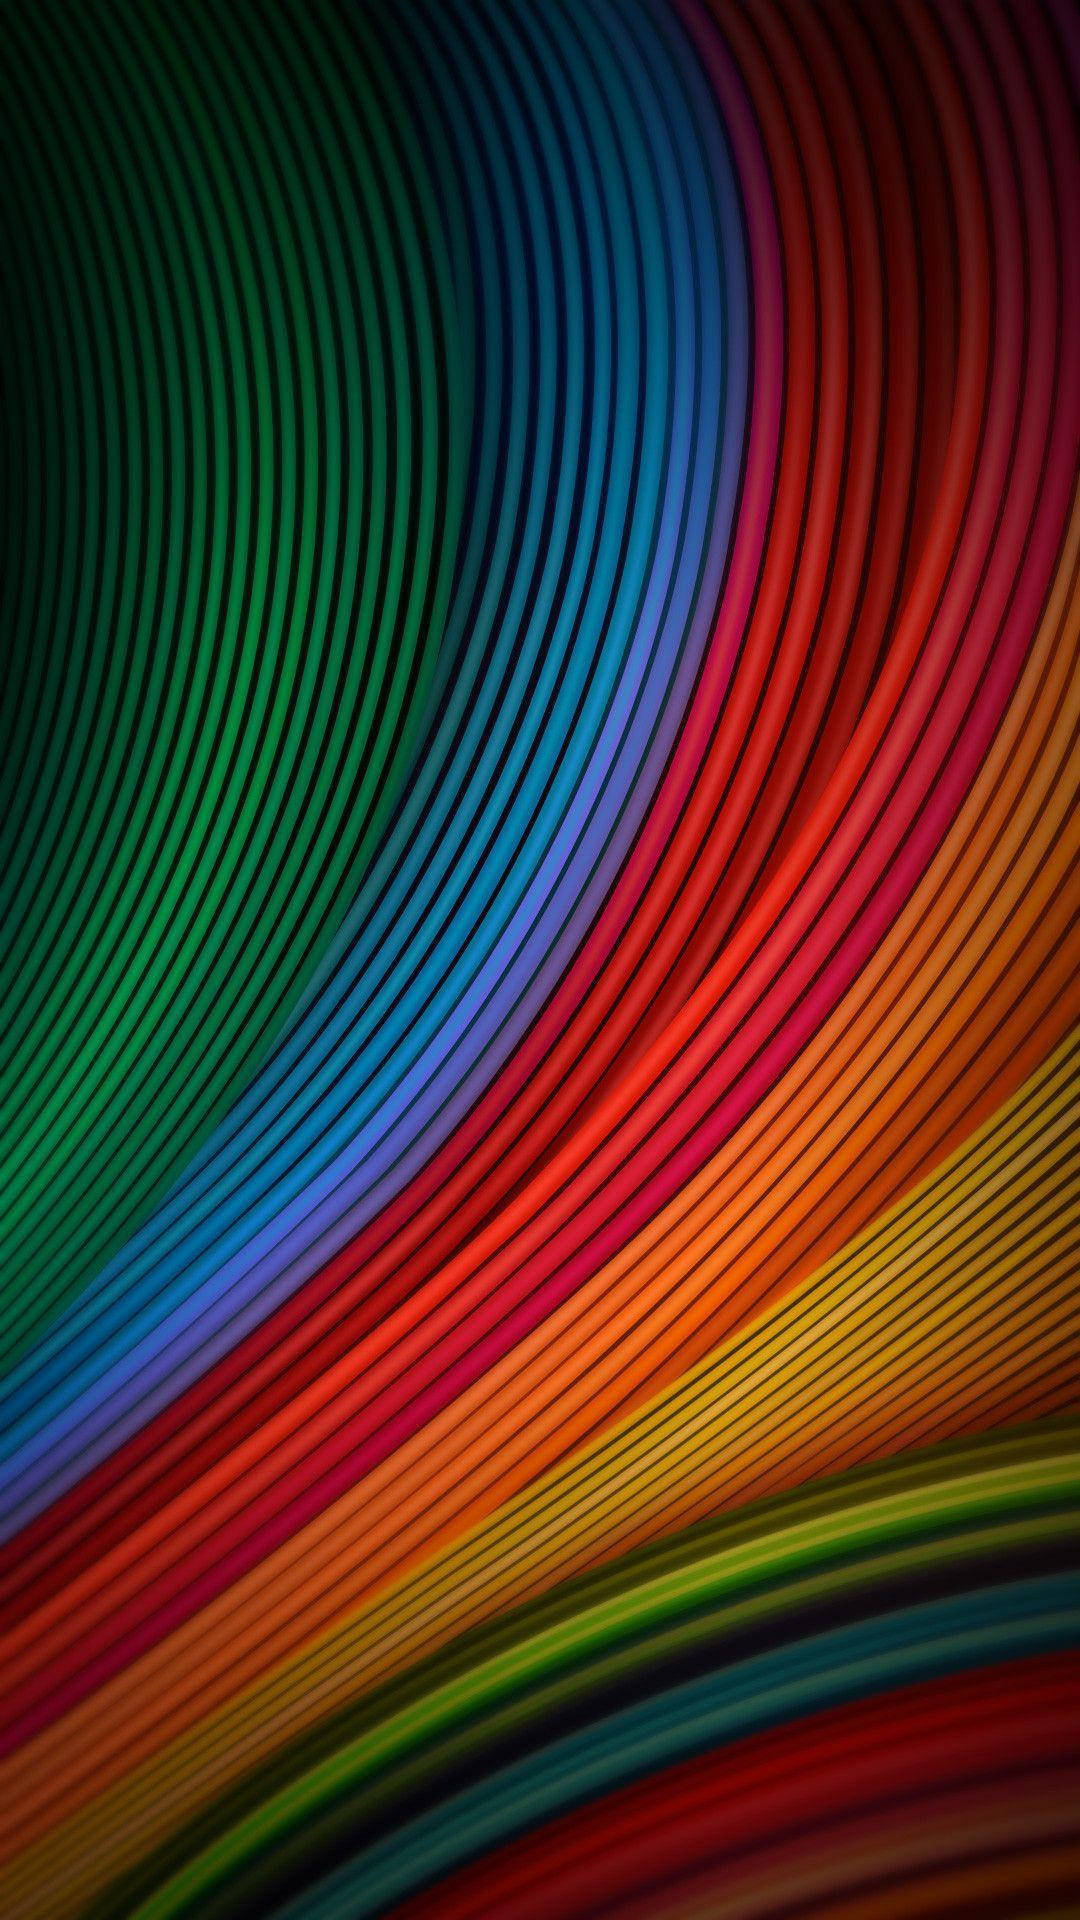 Rainbow Wires And Cords Miui Wallpaper